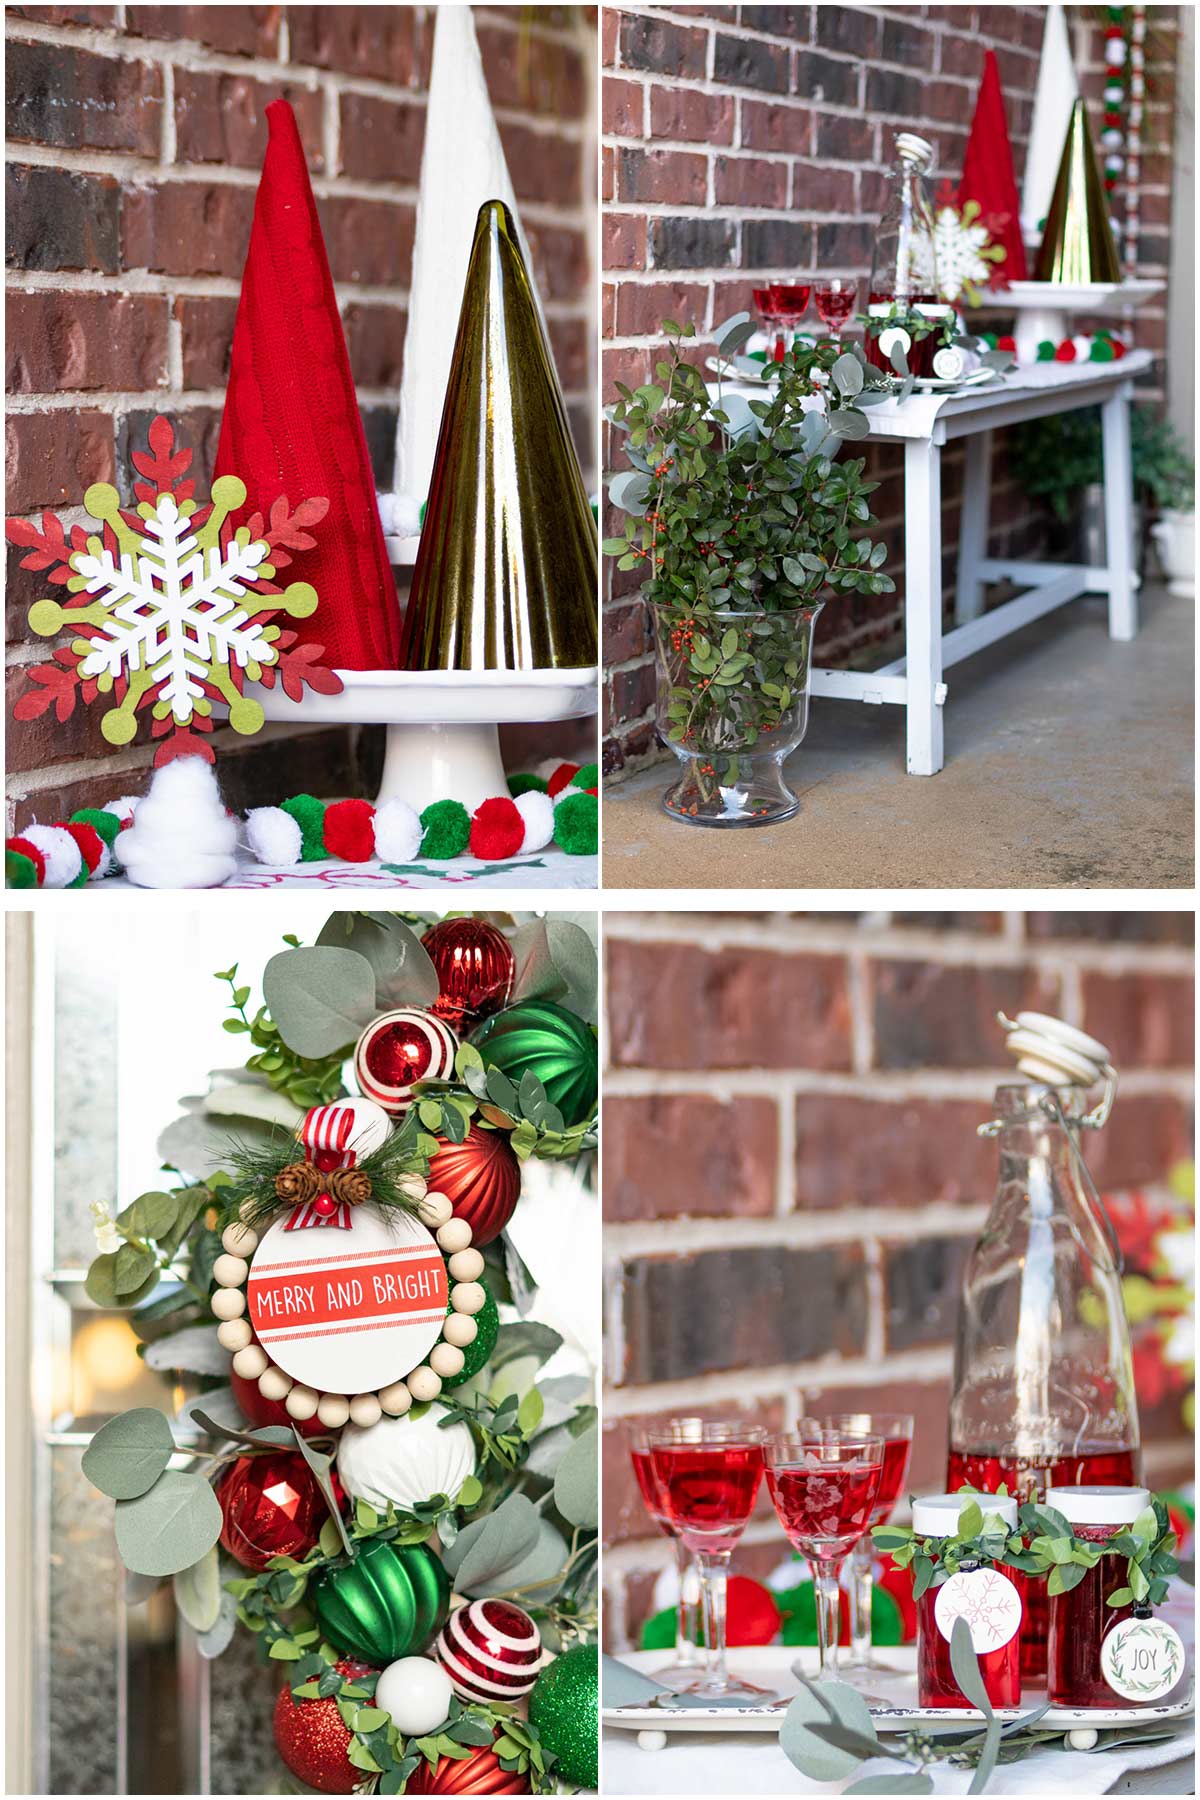 a 4 picture collage of holiday decor on a porch. There is a close up of some decorations, a bench that has fresh greenery in a vase in front of it, a close up of ornaments on a wreath, and a bottle of red cranberry vodka also poured into glasses.